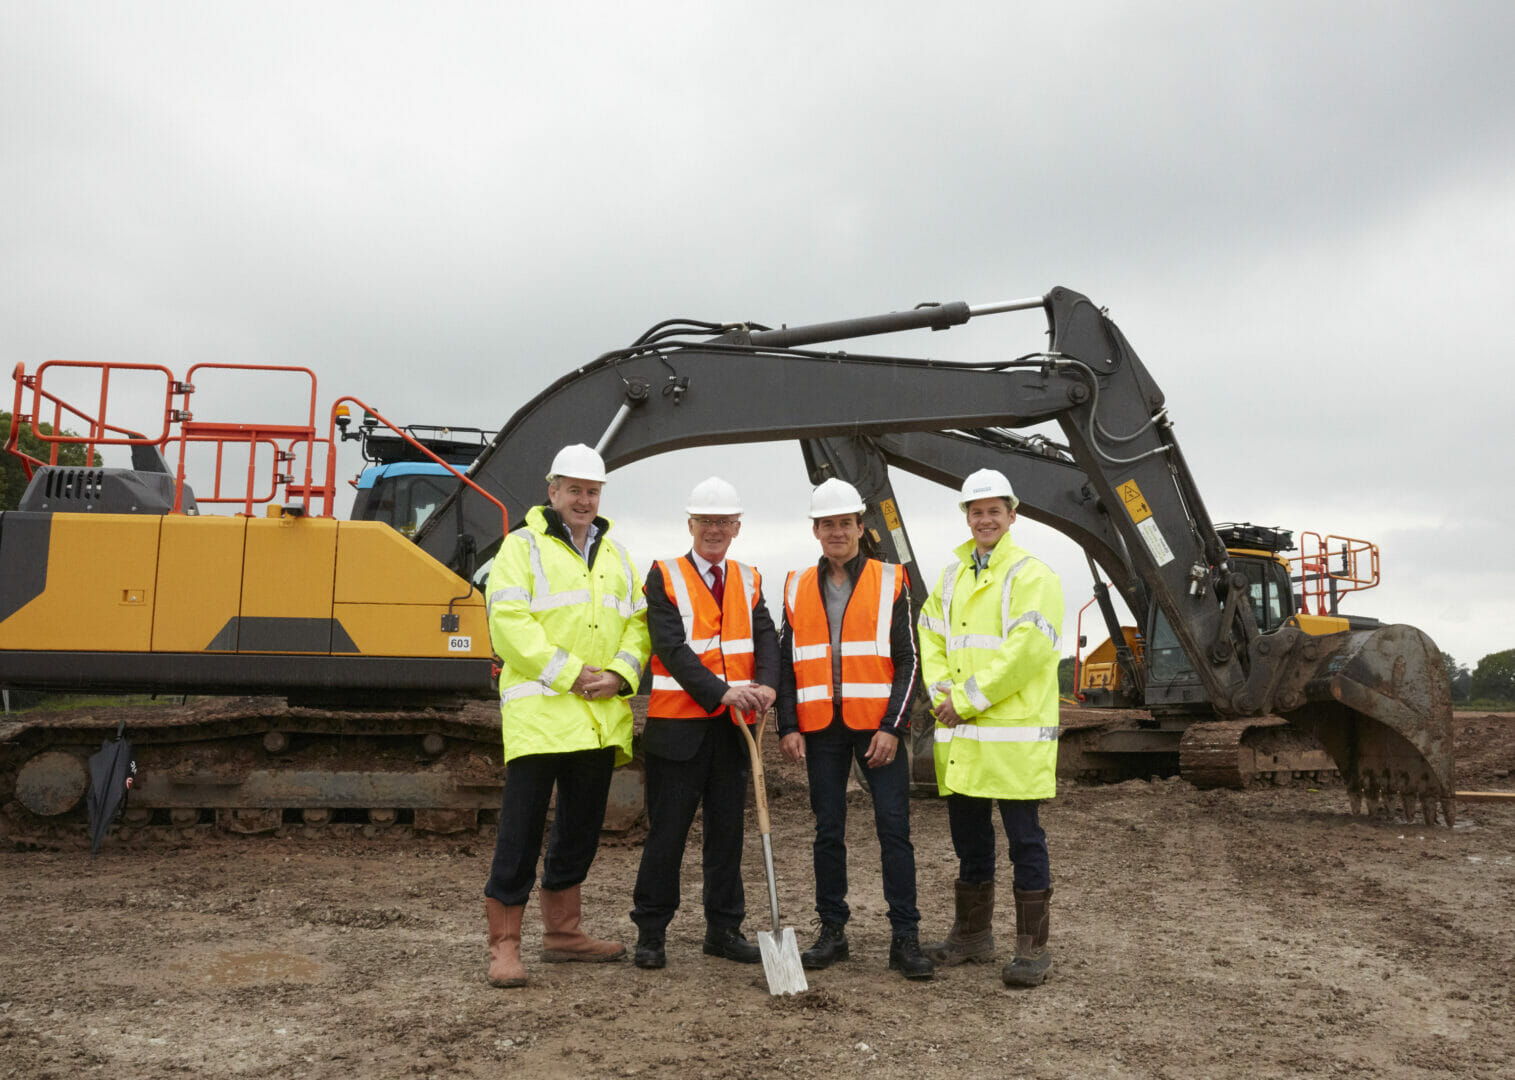 THG AND STOFORD BREAK GROUND ON 11.6-ACRE SITE IN MANCHESTER